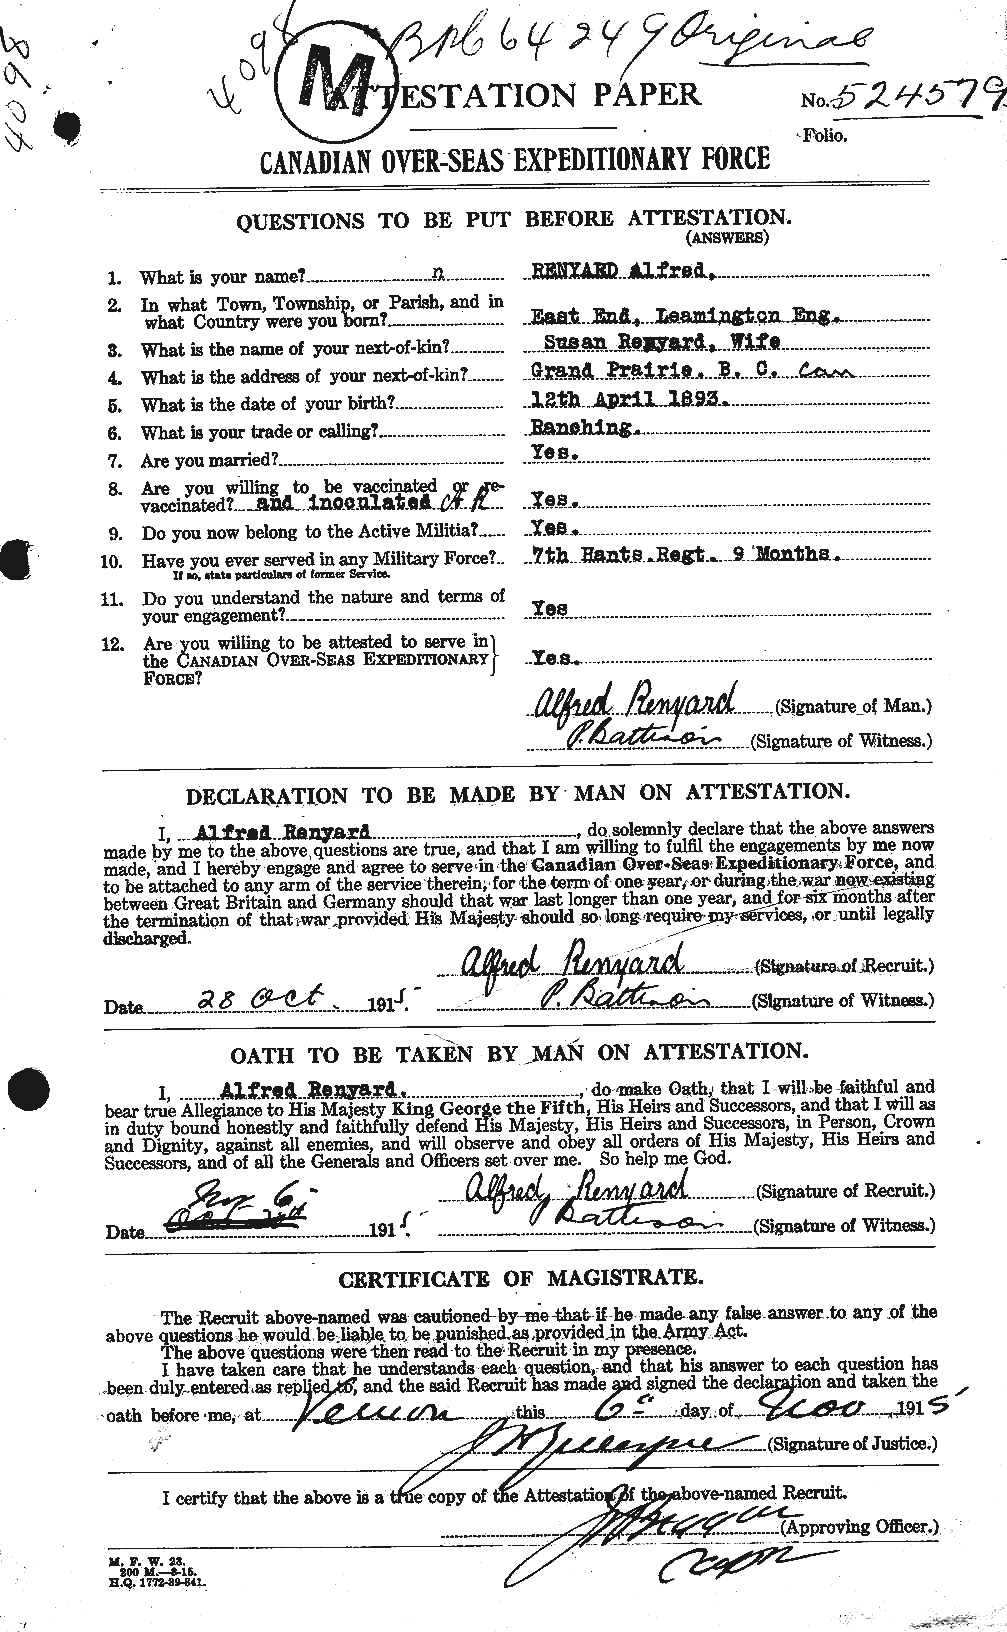 Personnel Records of the First World War - CEF 600151a